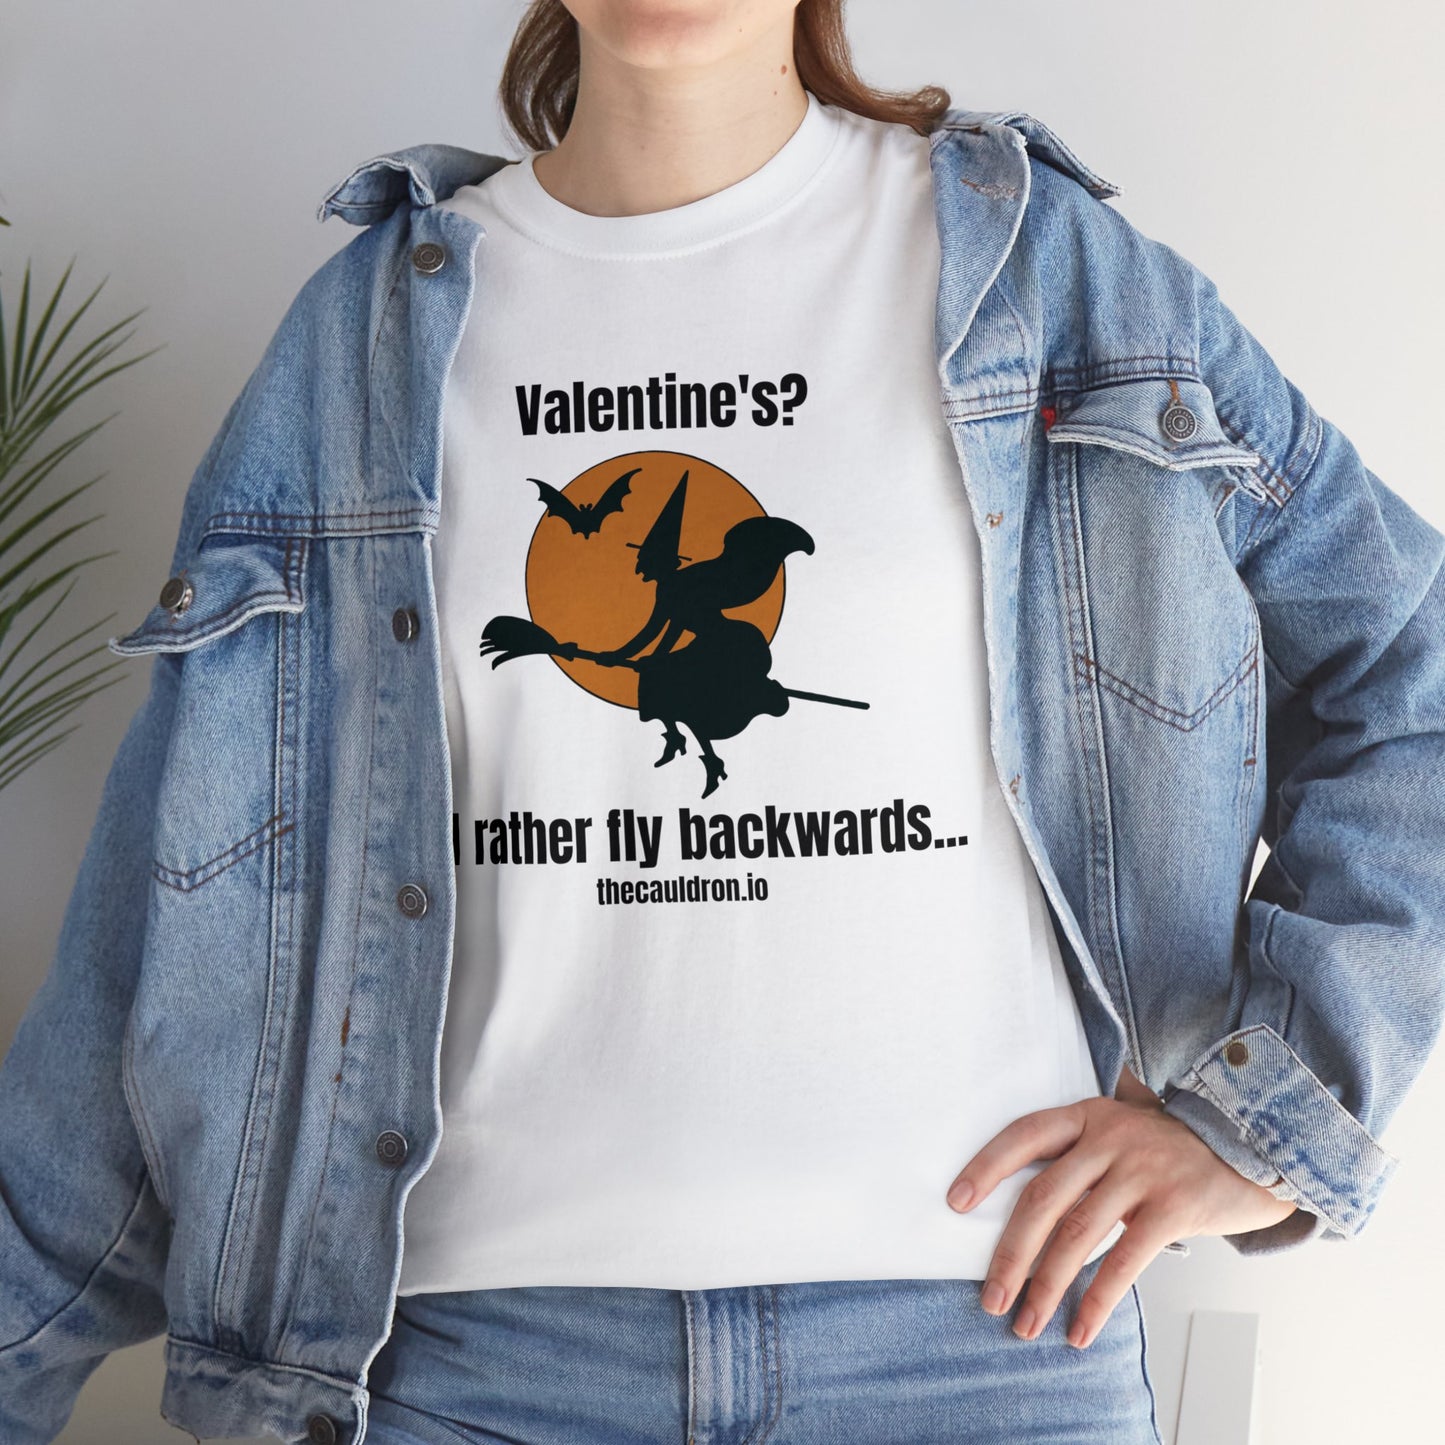 I'd Rather Fly Backwards Special Edition Graphic Tee